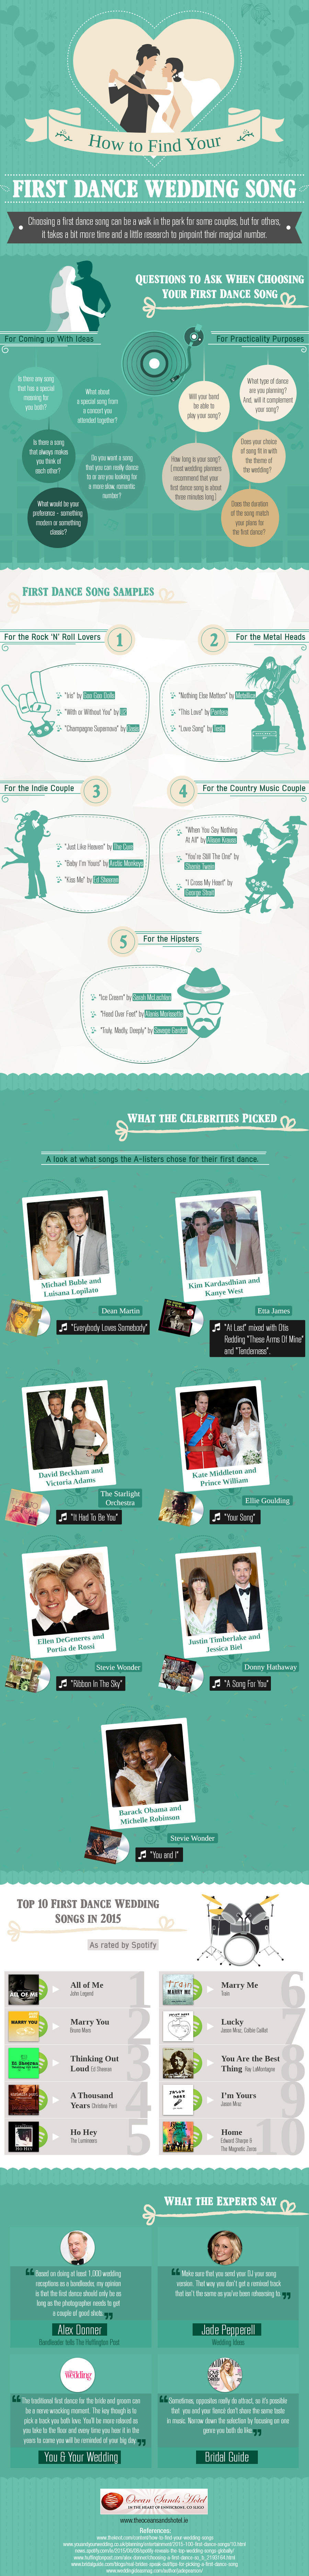 First-Dance-Wedding-Song-Infographic